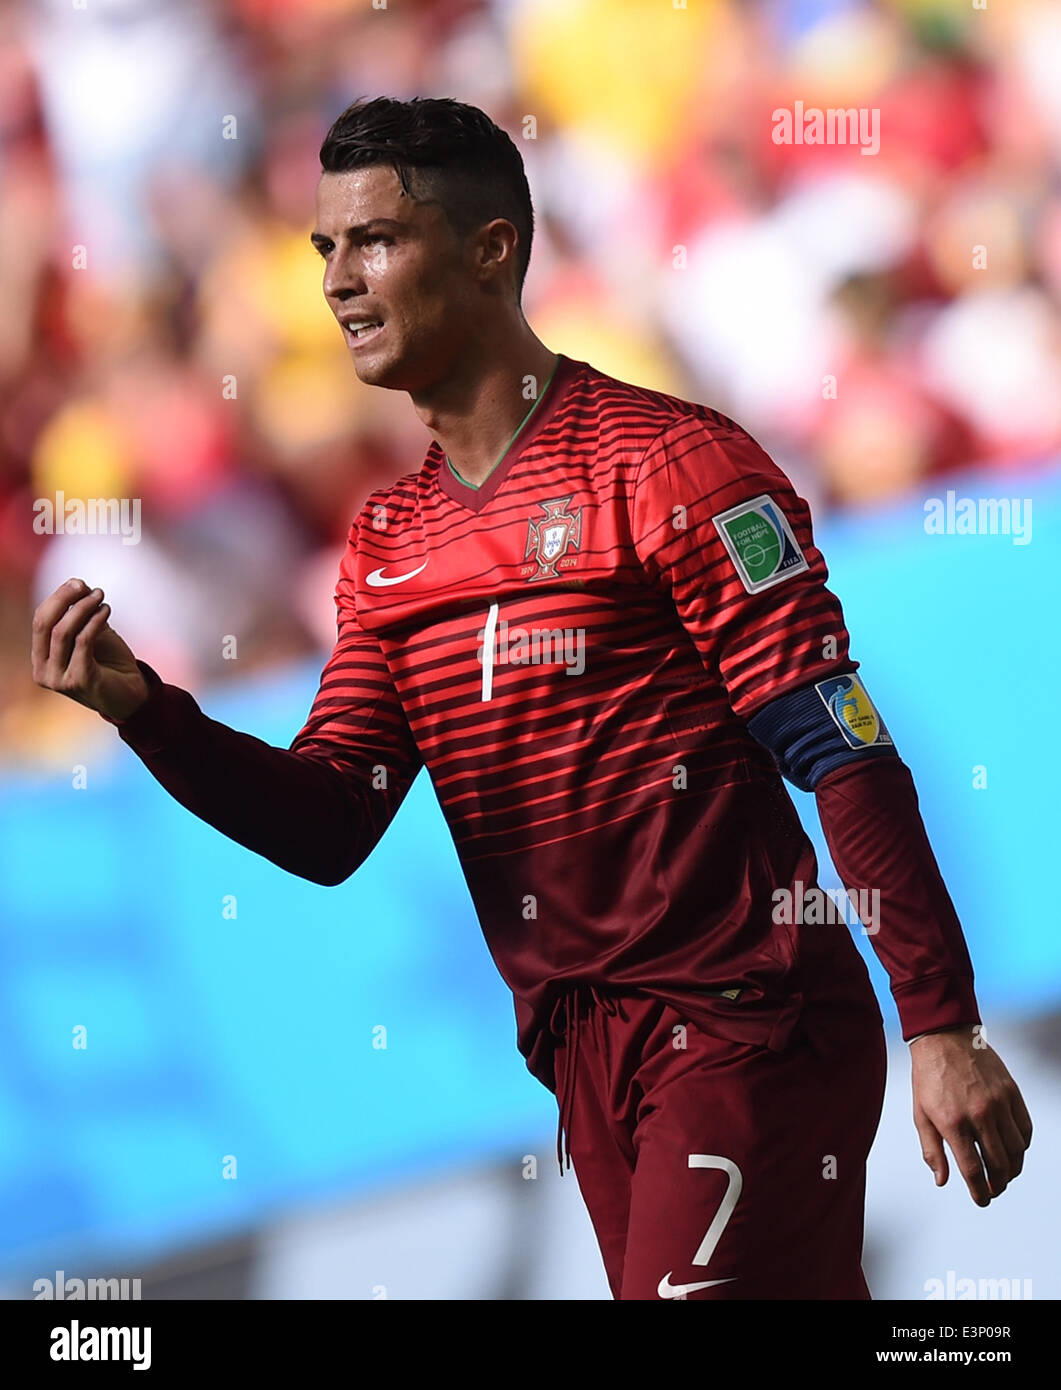 Brasilia, Brazil. 26th June, 2014. Cristiano Ronaldo of Portugal reacts during the FIFA World Cup 2014 group G preliminary round match between Portugal and Ghana at the Estadio National Stadium in Brasilia, Brazil, on 26 June 2014 Credit: © dpa picture alliance/Alamy Live News  Stock Photo